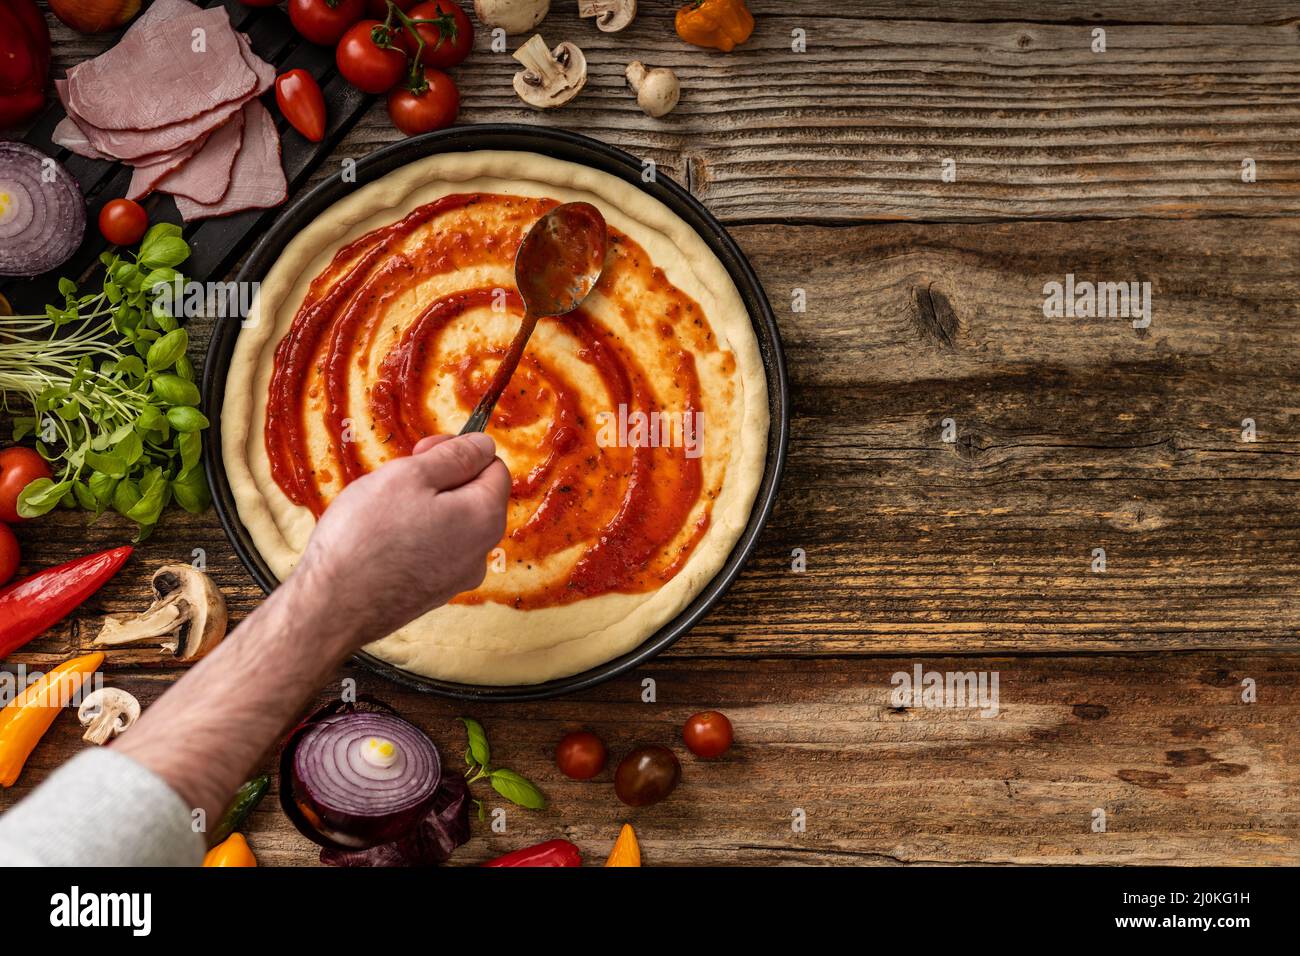 Raw delicious pizza dough with red souce on the wooden table Stock Photo